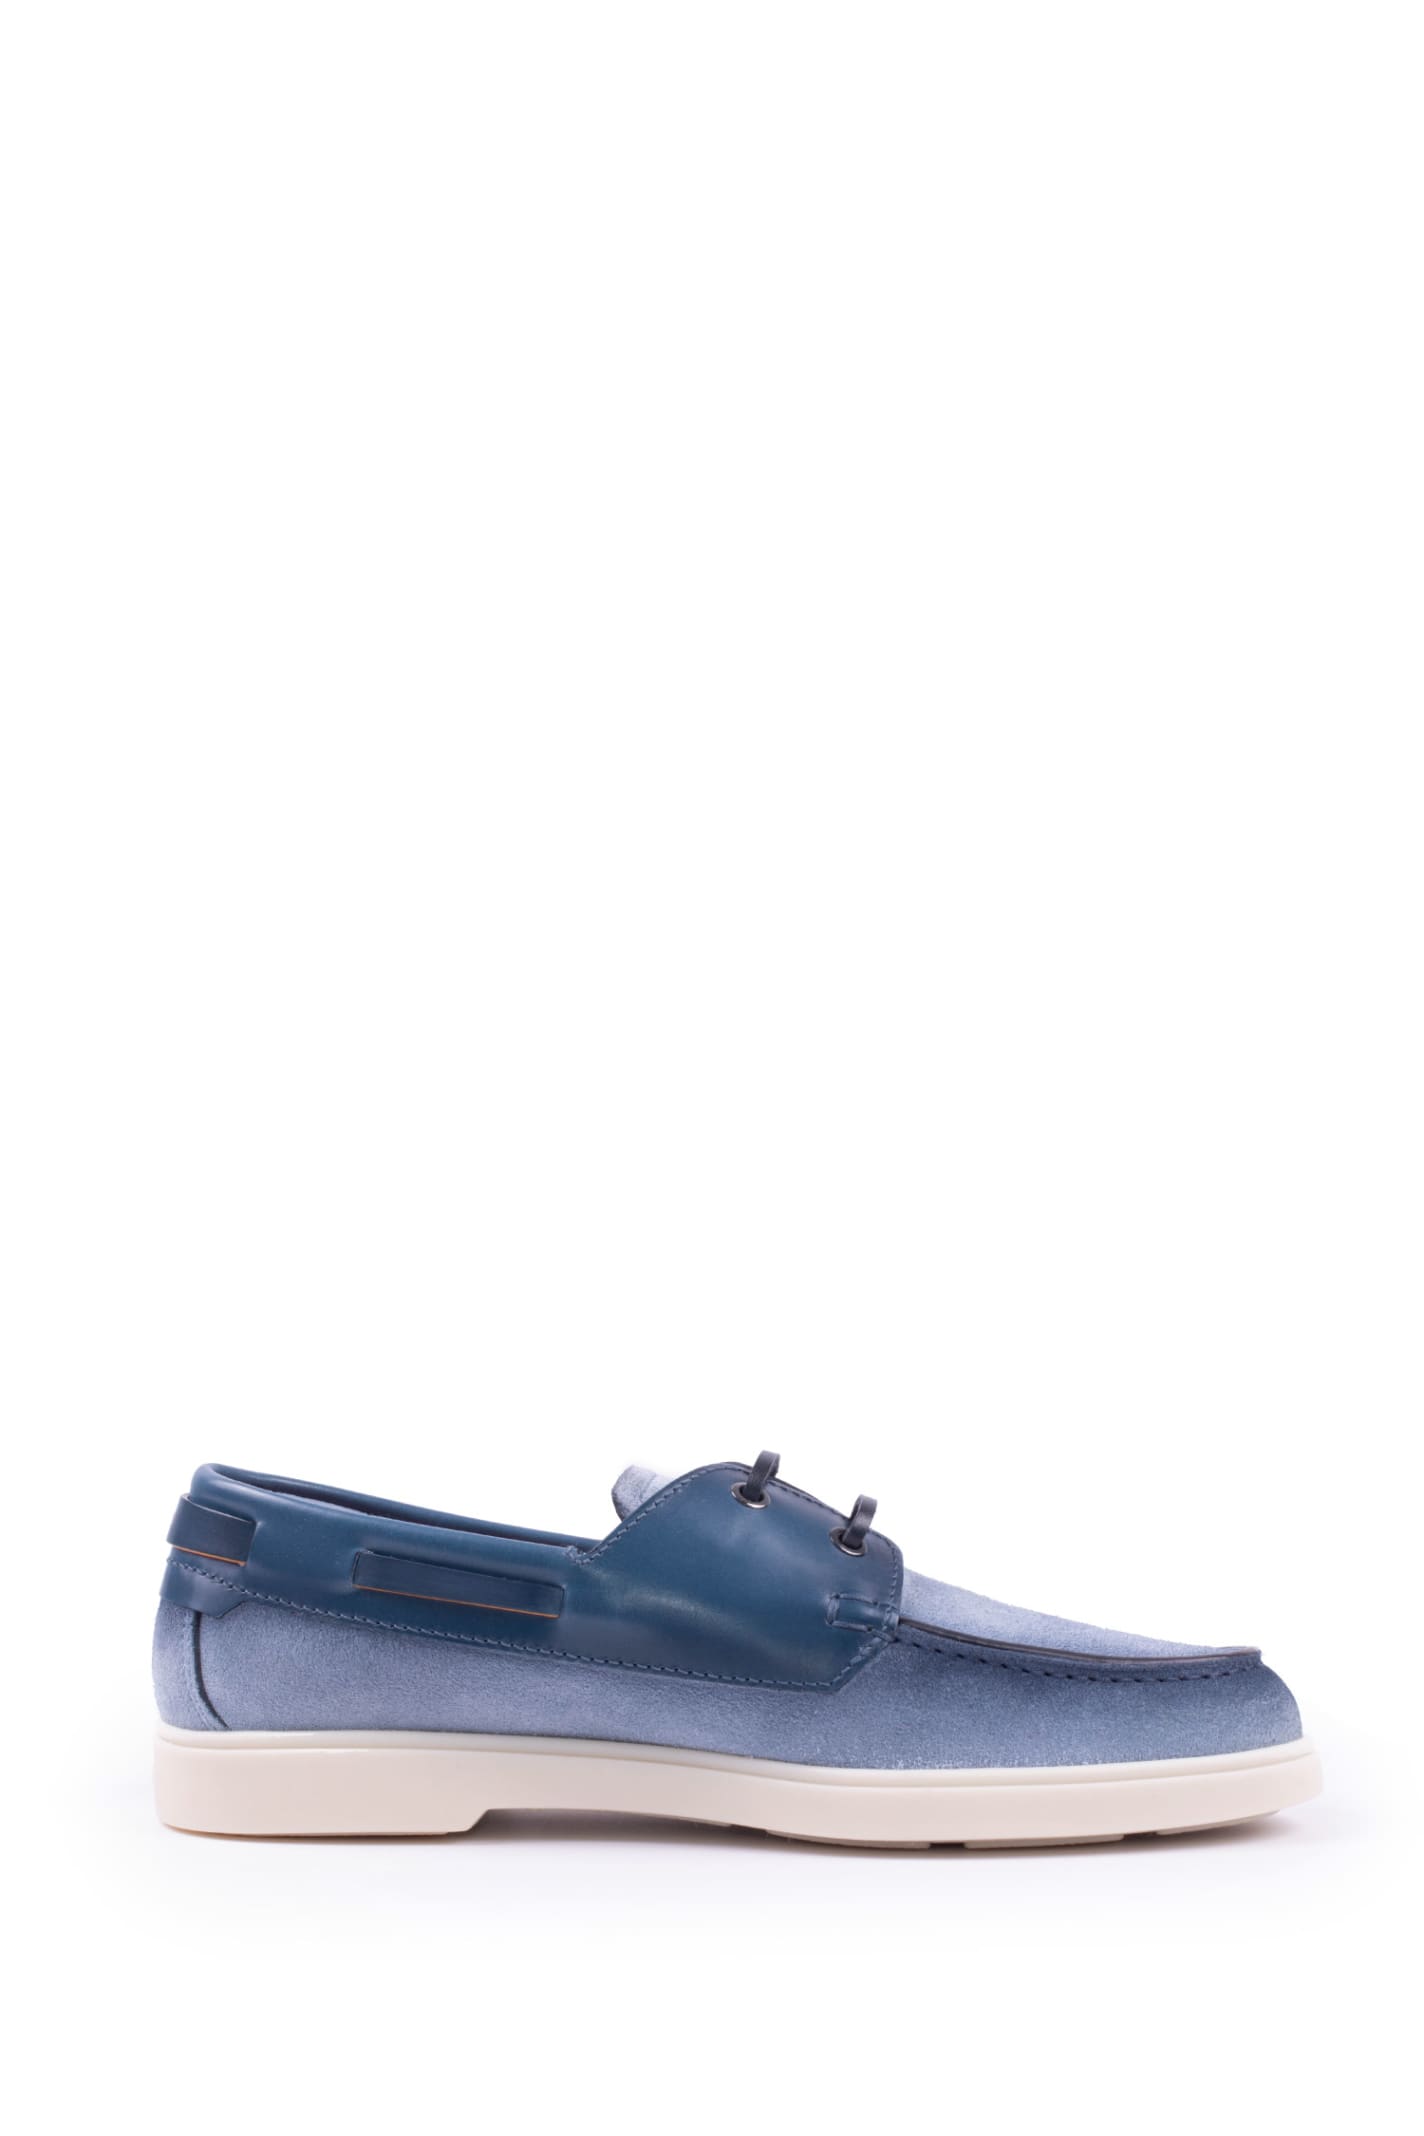 Santoni Leather And Suede Moccasins